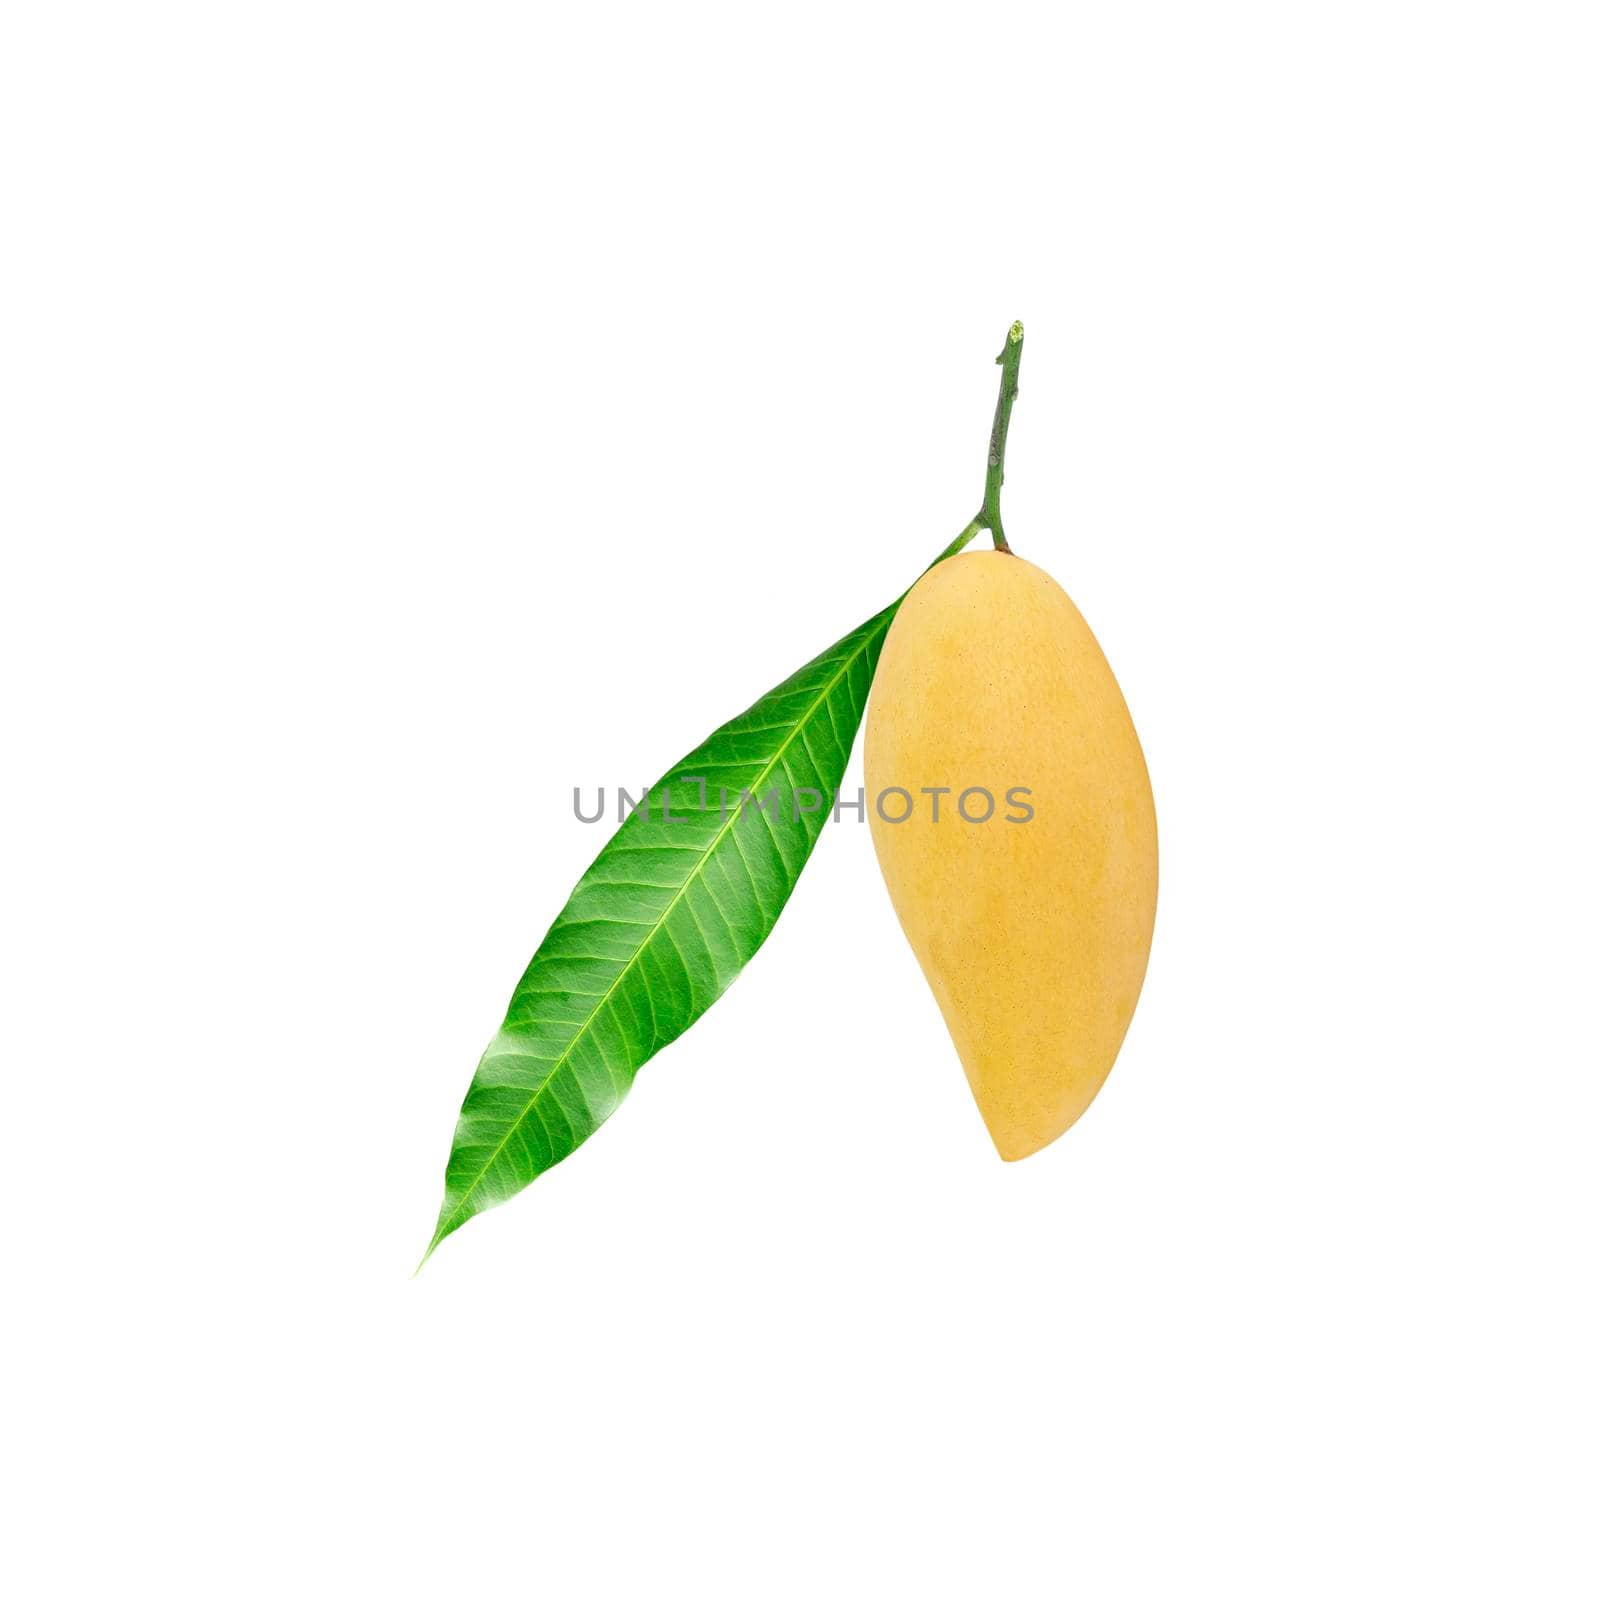 Yellow ripe mango with green leaf isolated on white background by wattanaphob